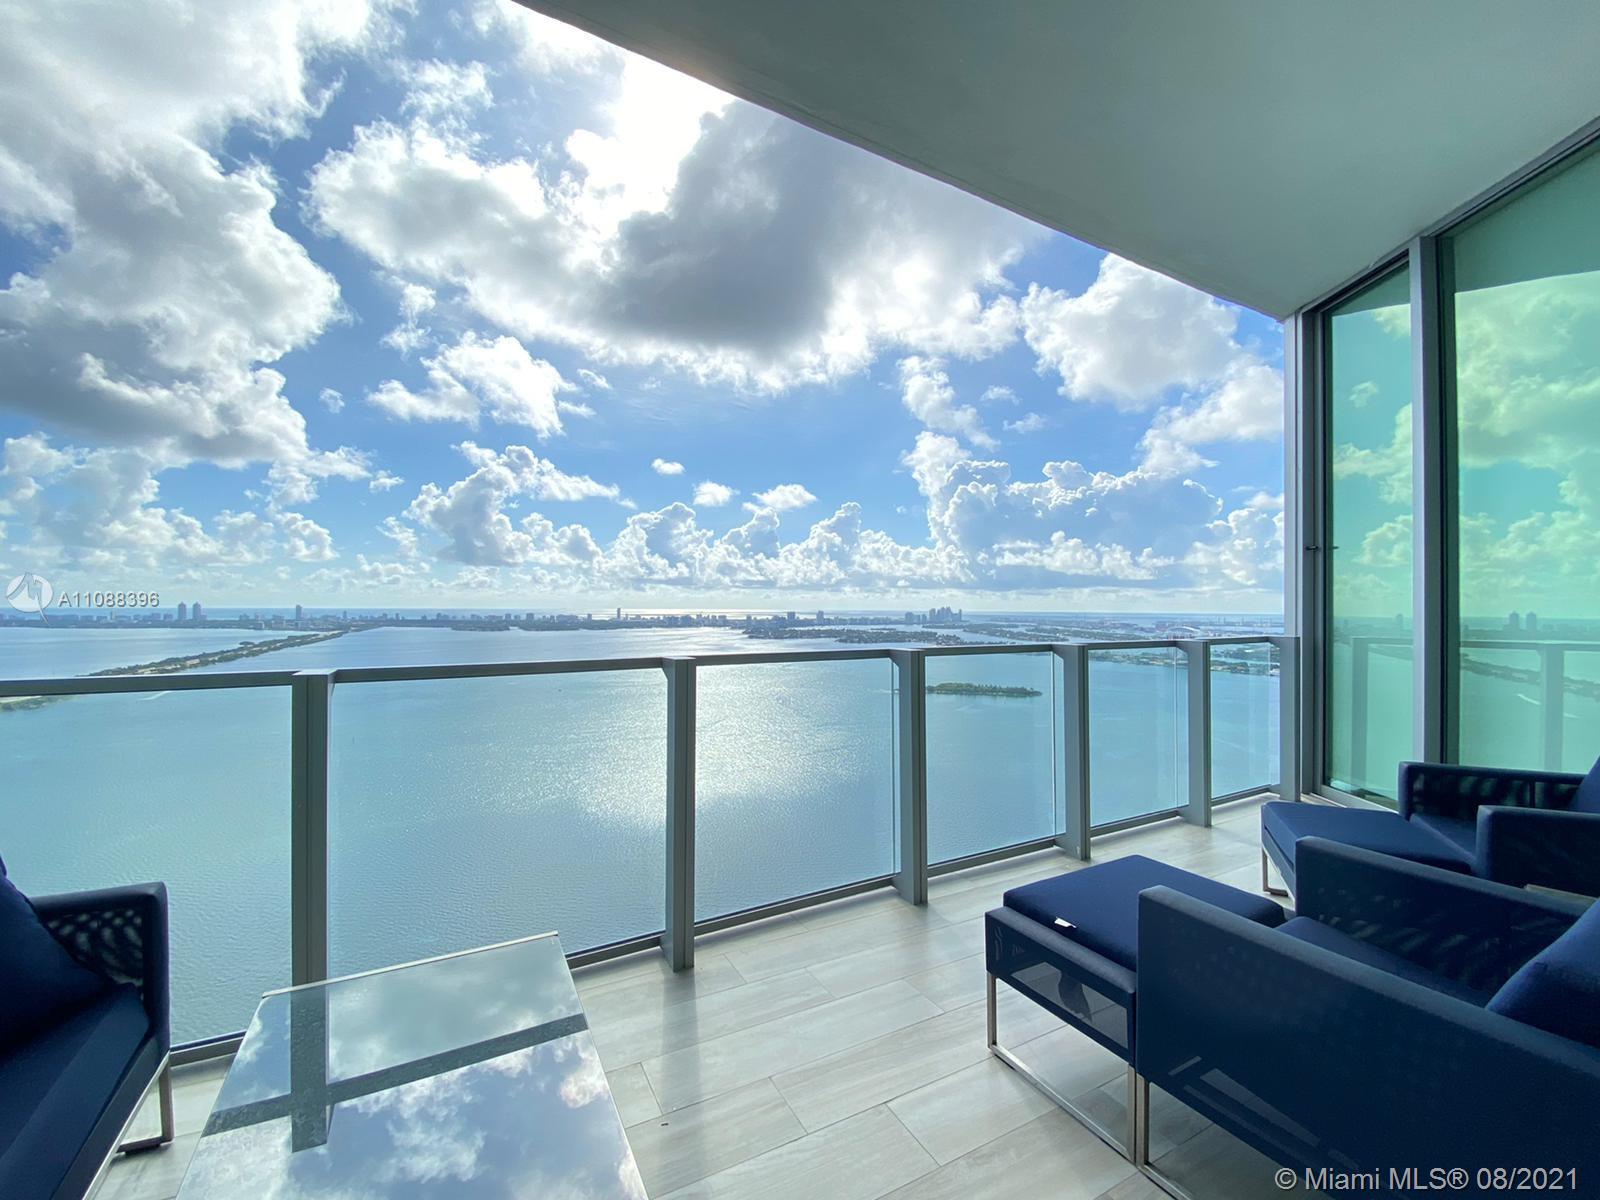 This bright water-front residence, located in Edgewater, features unobstructed Biscayne Bay and Miami Beach Skyline views. 2 bedrooms, floor to ceiling impact glass windows, large balcony, kitchen, Miele appliances and quartz counter tops, custom built walk-in closets and vanities, motorized window shades and excellent open floor plan.

Miami’s premier members only beach club on Biscayne Bay, oversized terraces with views of Biscayne Bay, Miami Beach, and downtown skyline, fitness center, 24 Hour security, video surveillance, valet parking?, summer kitchen and lounge, pool and hot tub with panoramic views, two tennis courts, basketball half court, residence dog park, spa with sauna, steam room, blow-dry bar, massage treatment rooms & business center with audio video connectivity.